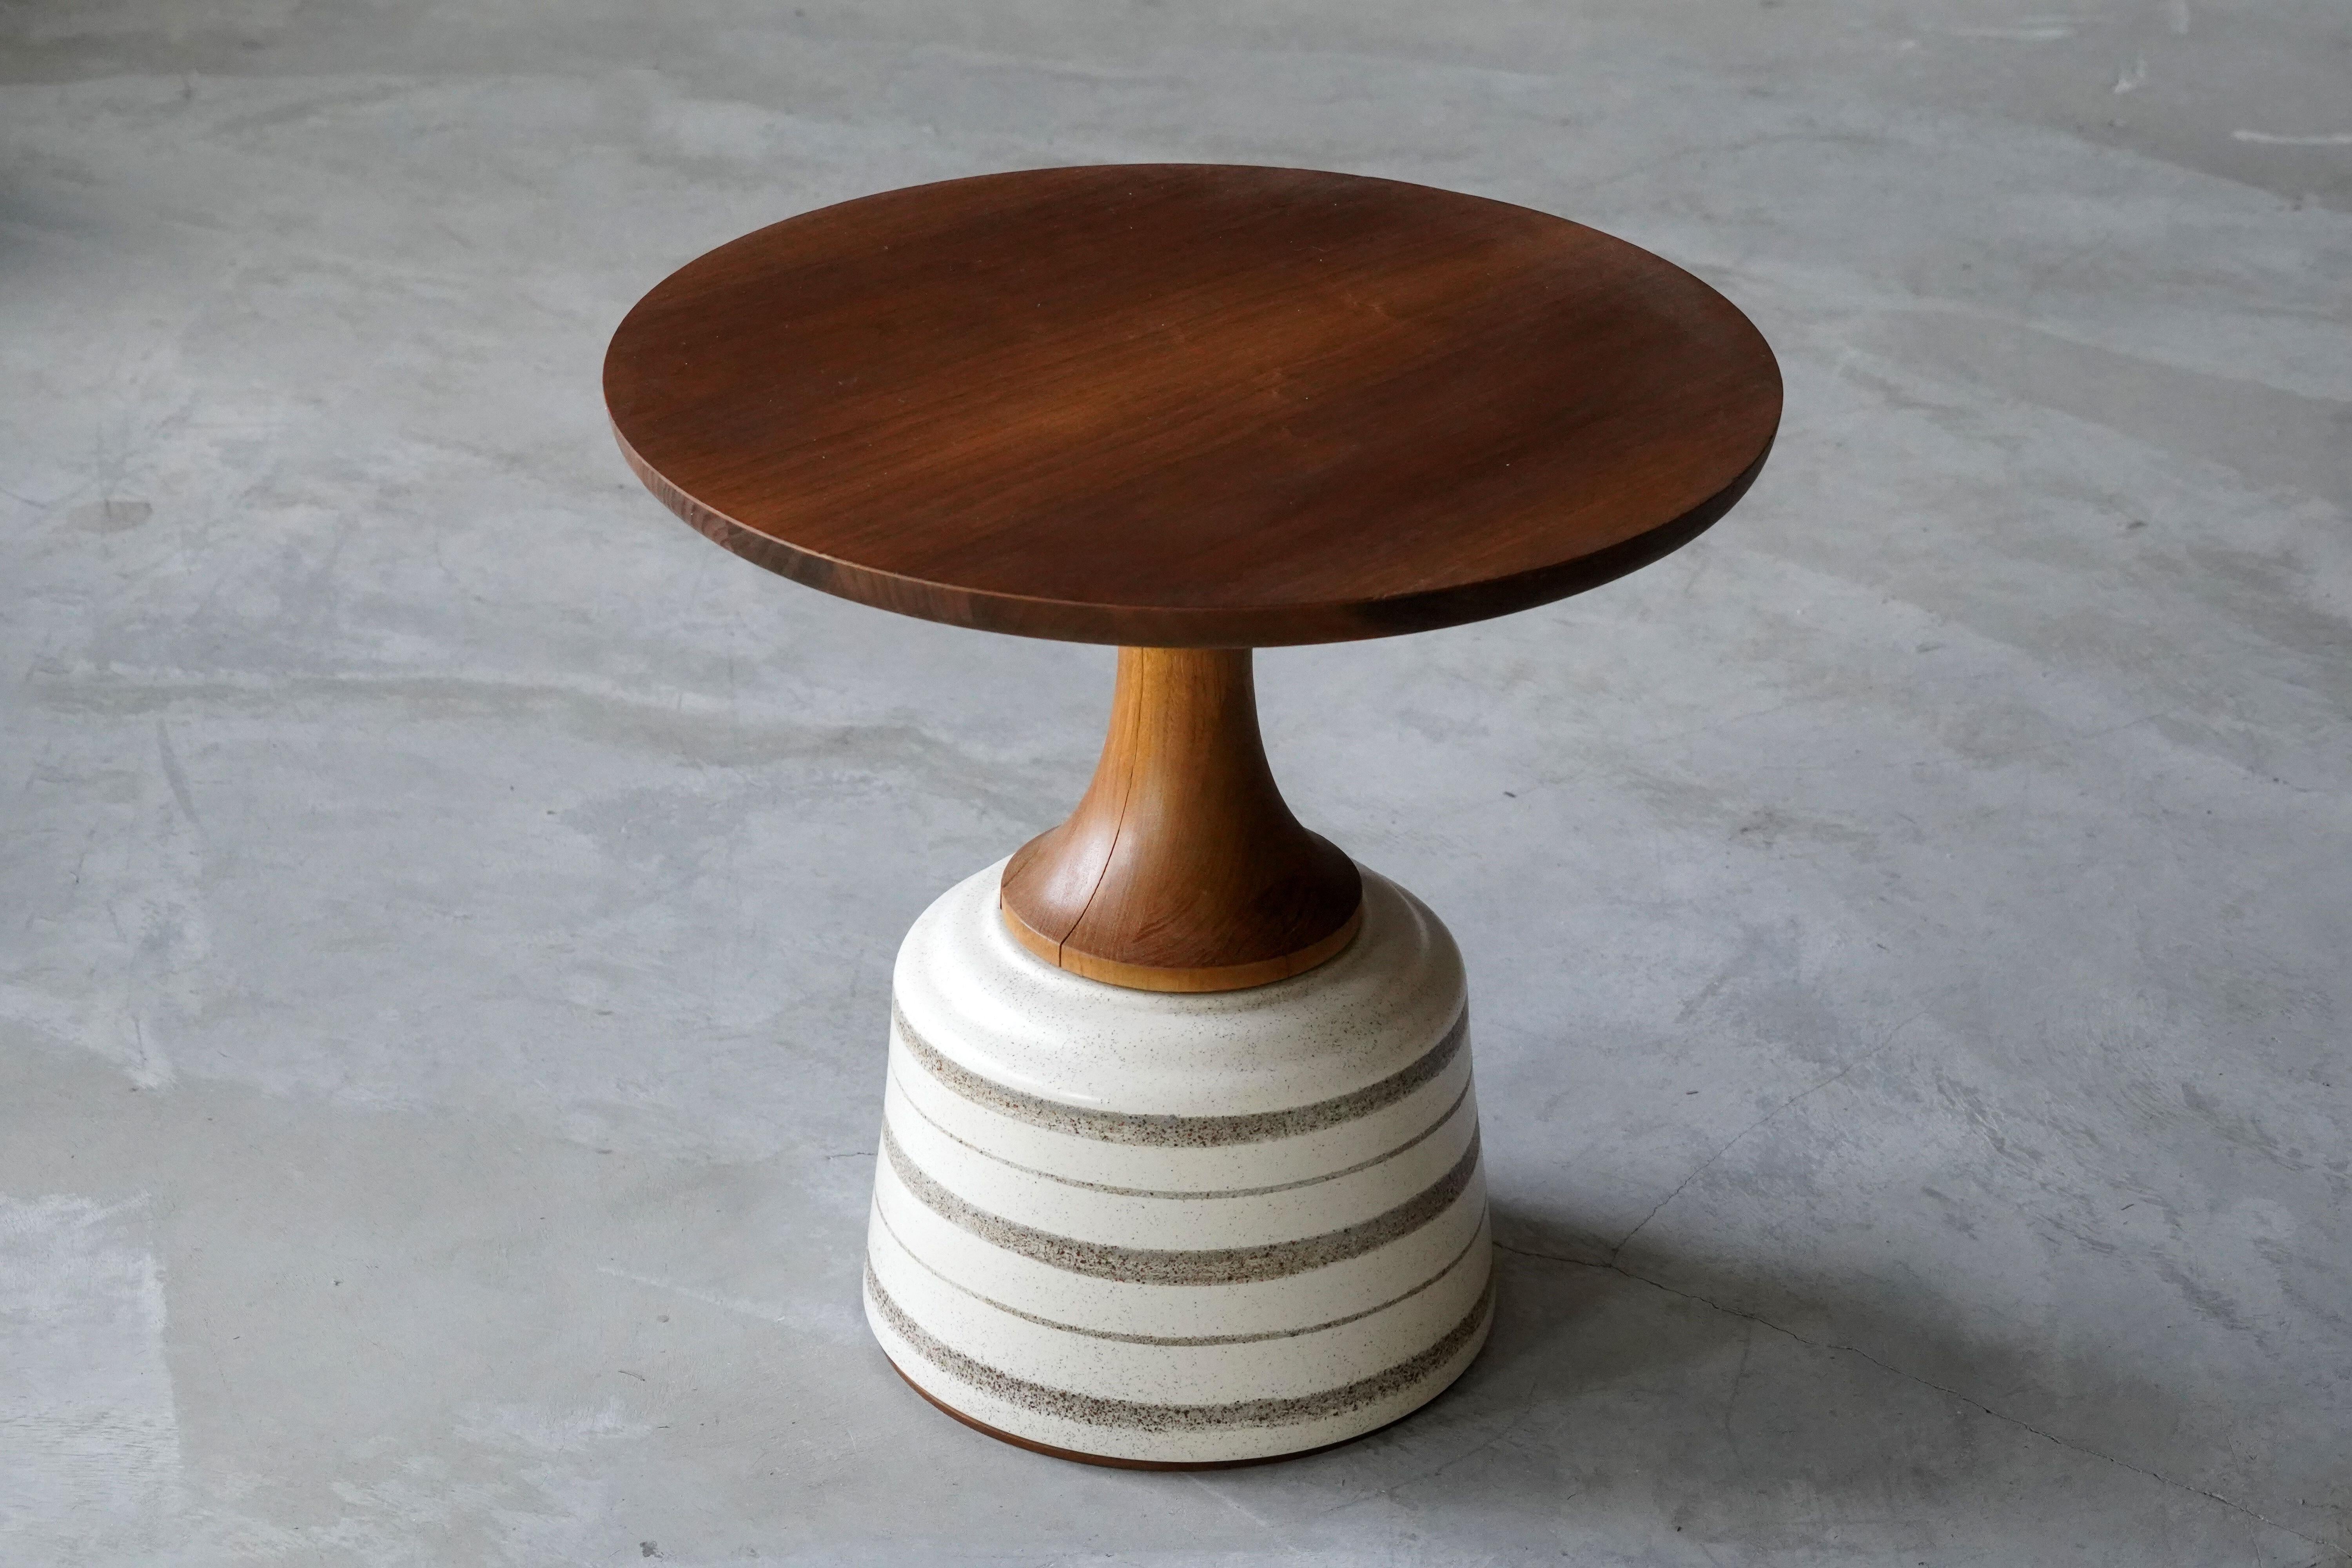 A side table or occasional table, designed by John Van Koert and produced by Drexel Furniture Company, North Carolina, America. 

Finely carved cherrywood tops are mounted atop the glazed ceramic bases. 

Other designers of the period include